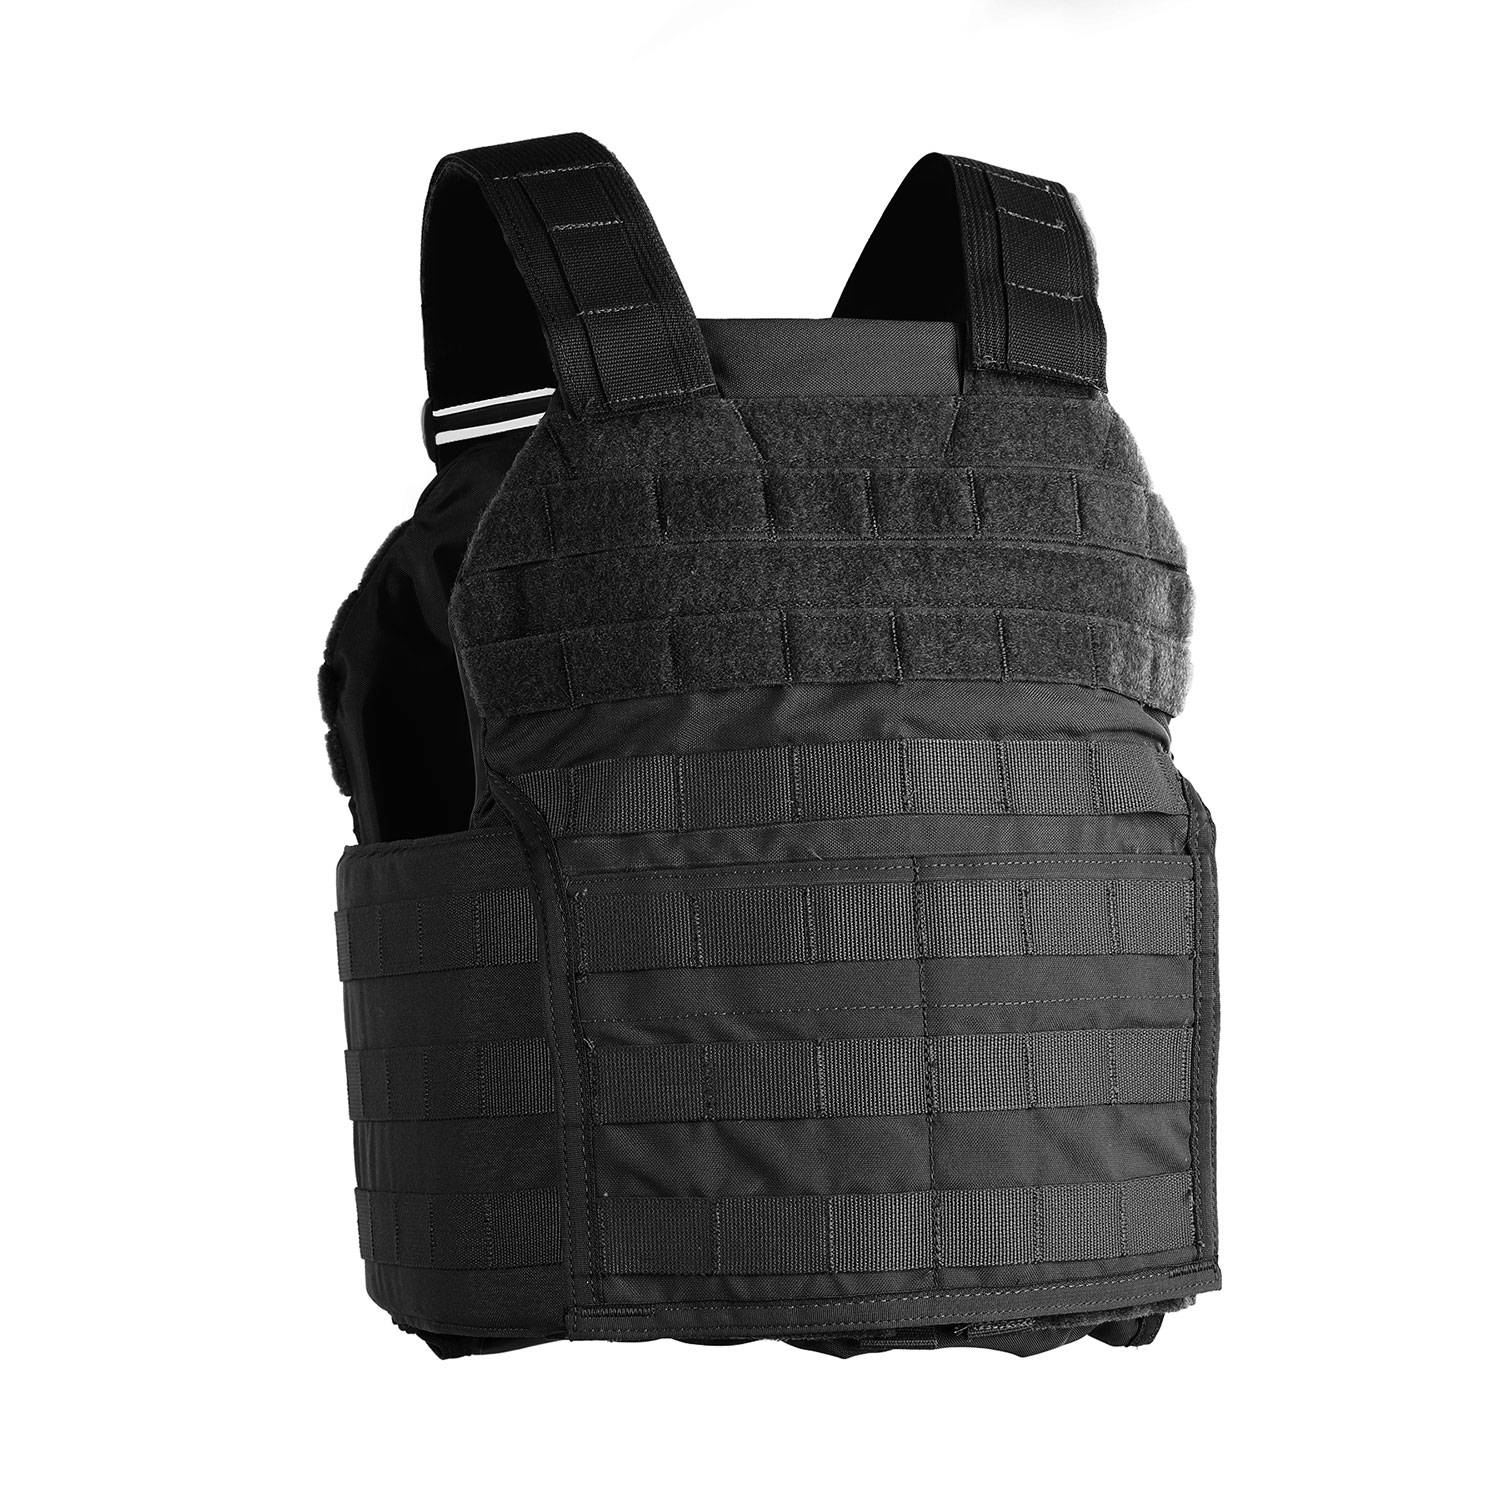 GALLS GTAC PLATE CARRIER WITH XPIIIA ARMOR